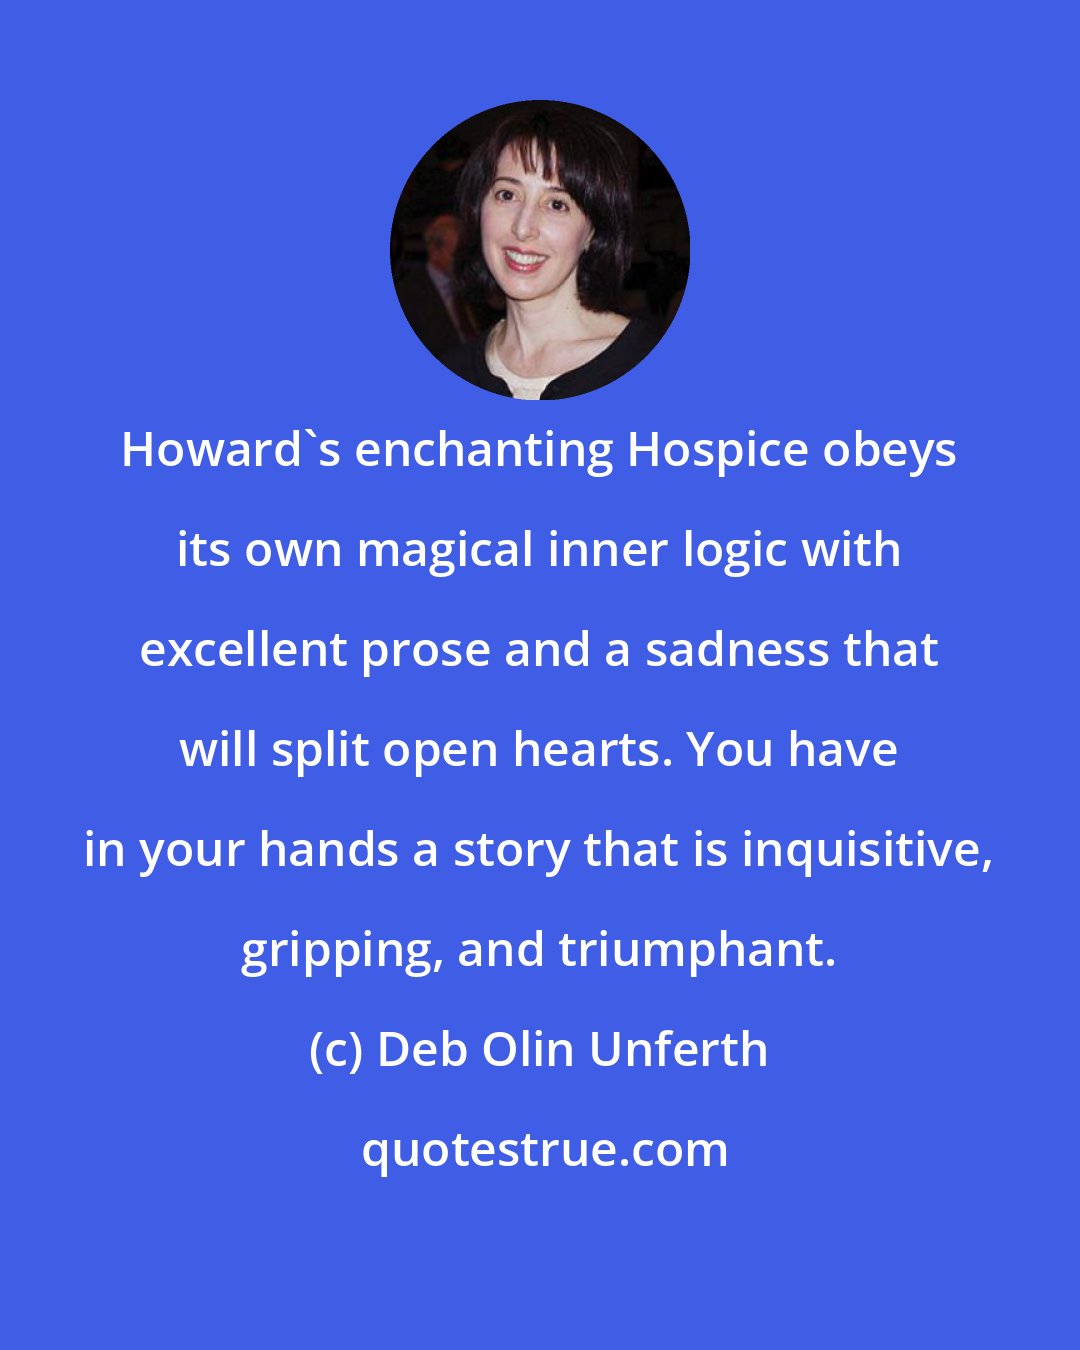 Deb Olin Unferth: Howard's enchanting Hospice obeys its own magical inner logic with excellent prose and a sadness that will split open hearts. You have in your hands a story that is inquisitive, gripping, and triumphant.